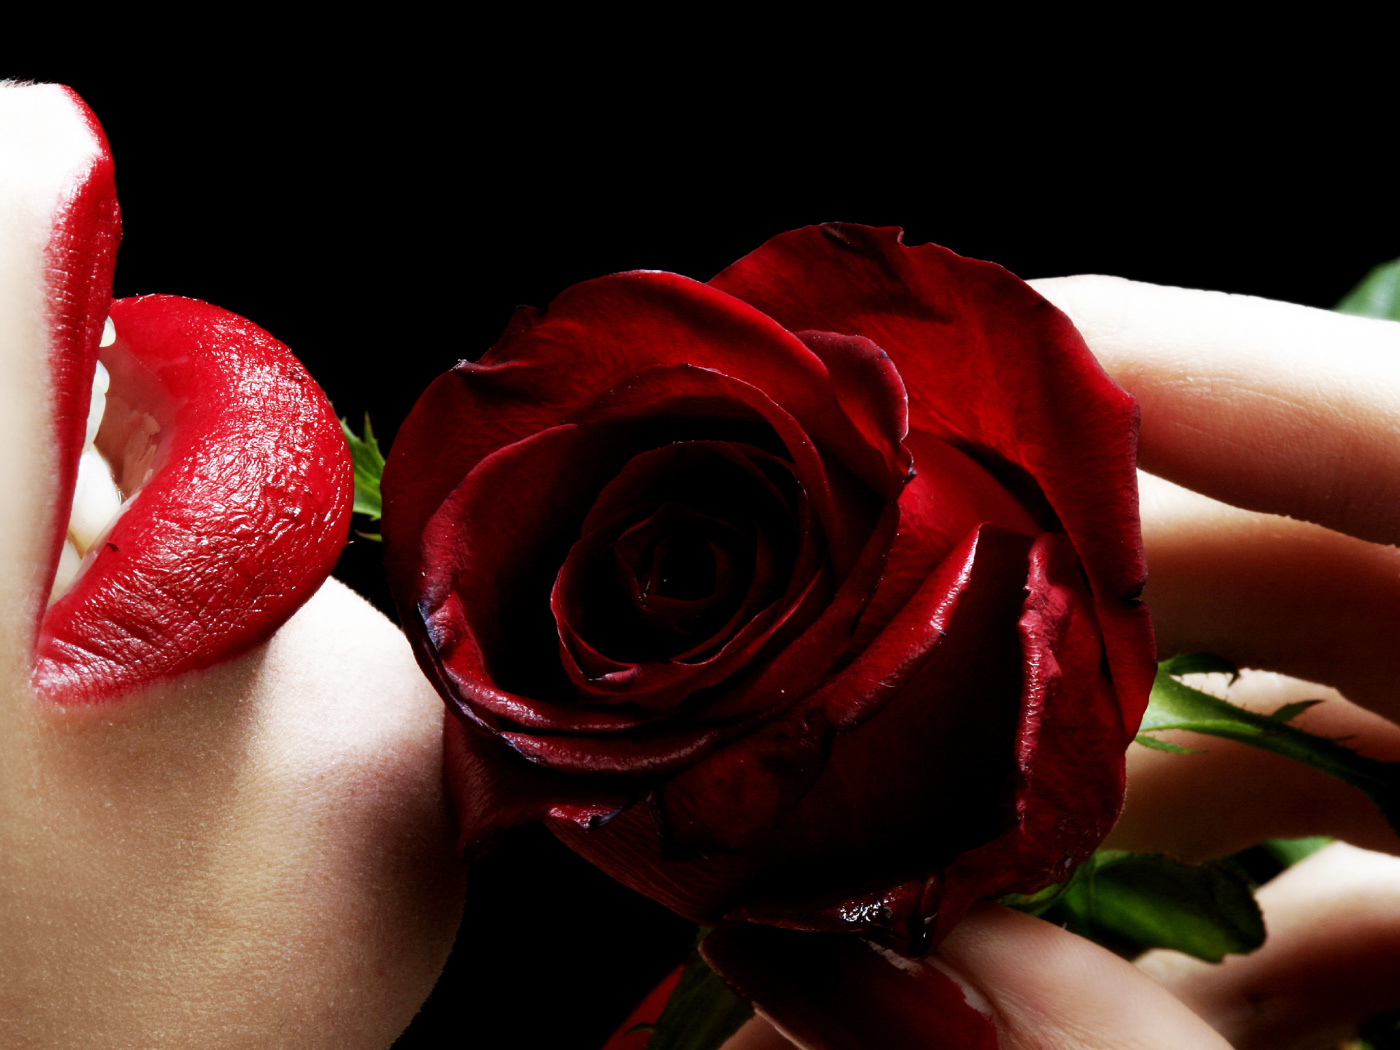 Das Red Rose and Lipstick Wallpaper 1400x1050